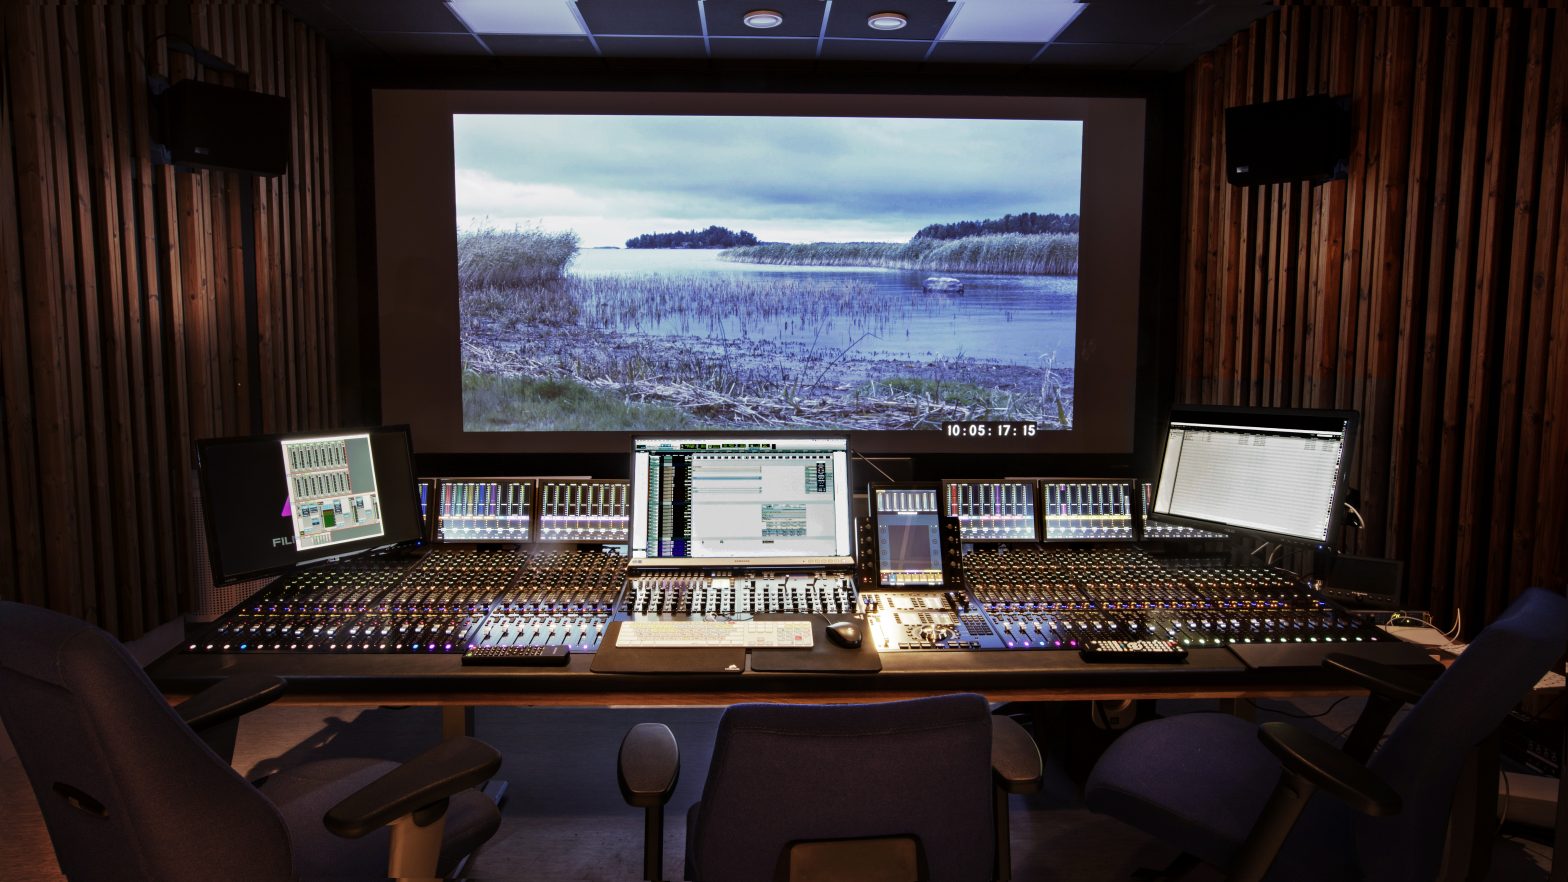 Looking for an Audio Post-production expert to join us